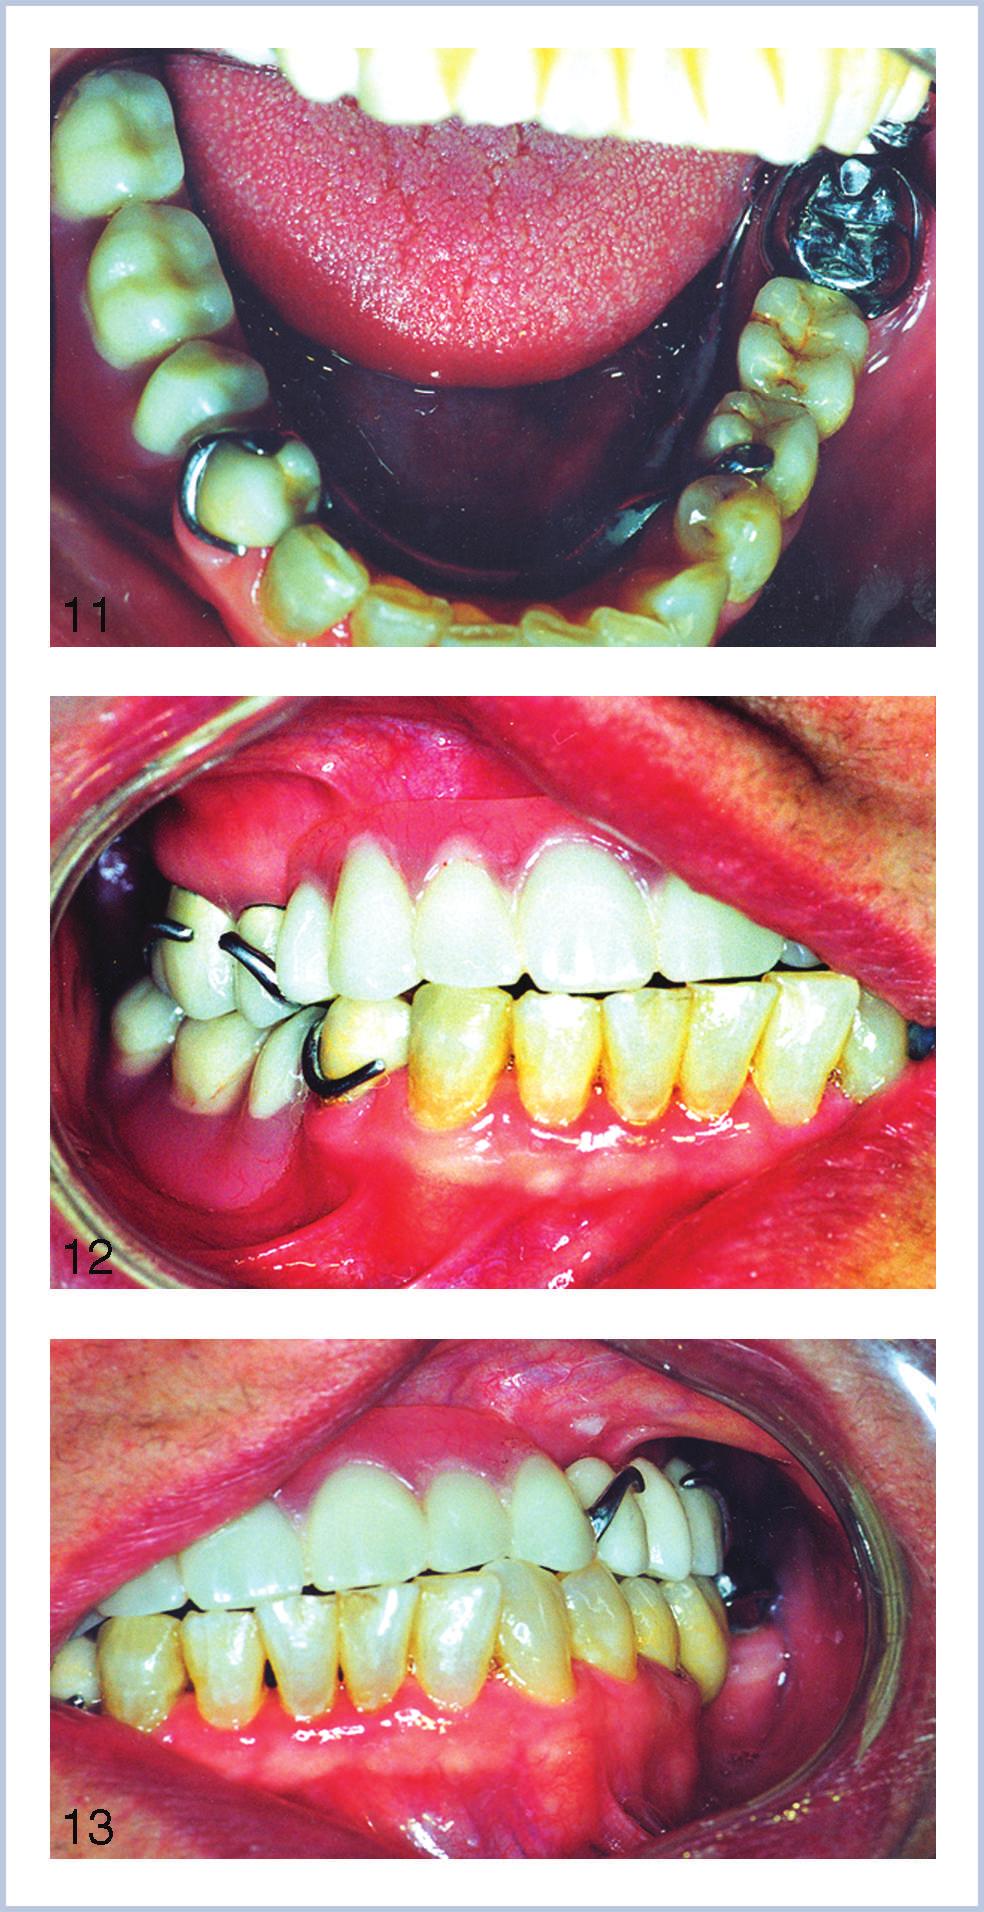 Firas A. M. AL Quran et al ed incidence of this complication varies in the literature. Dental implants are government regulated devices in the United States.